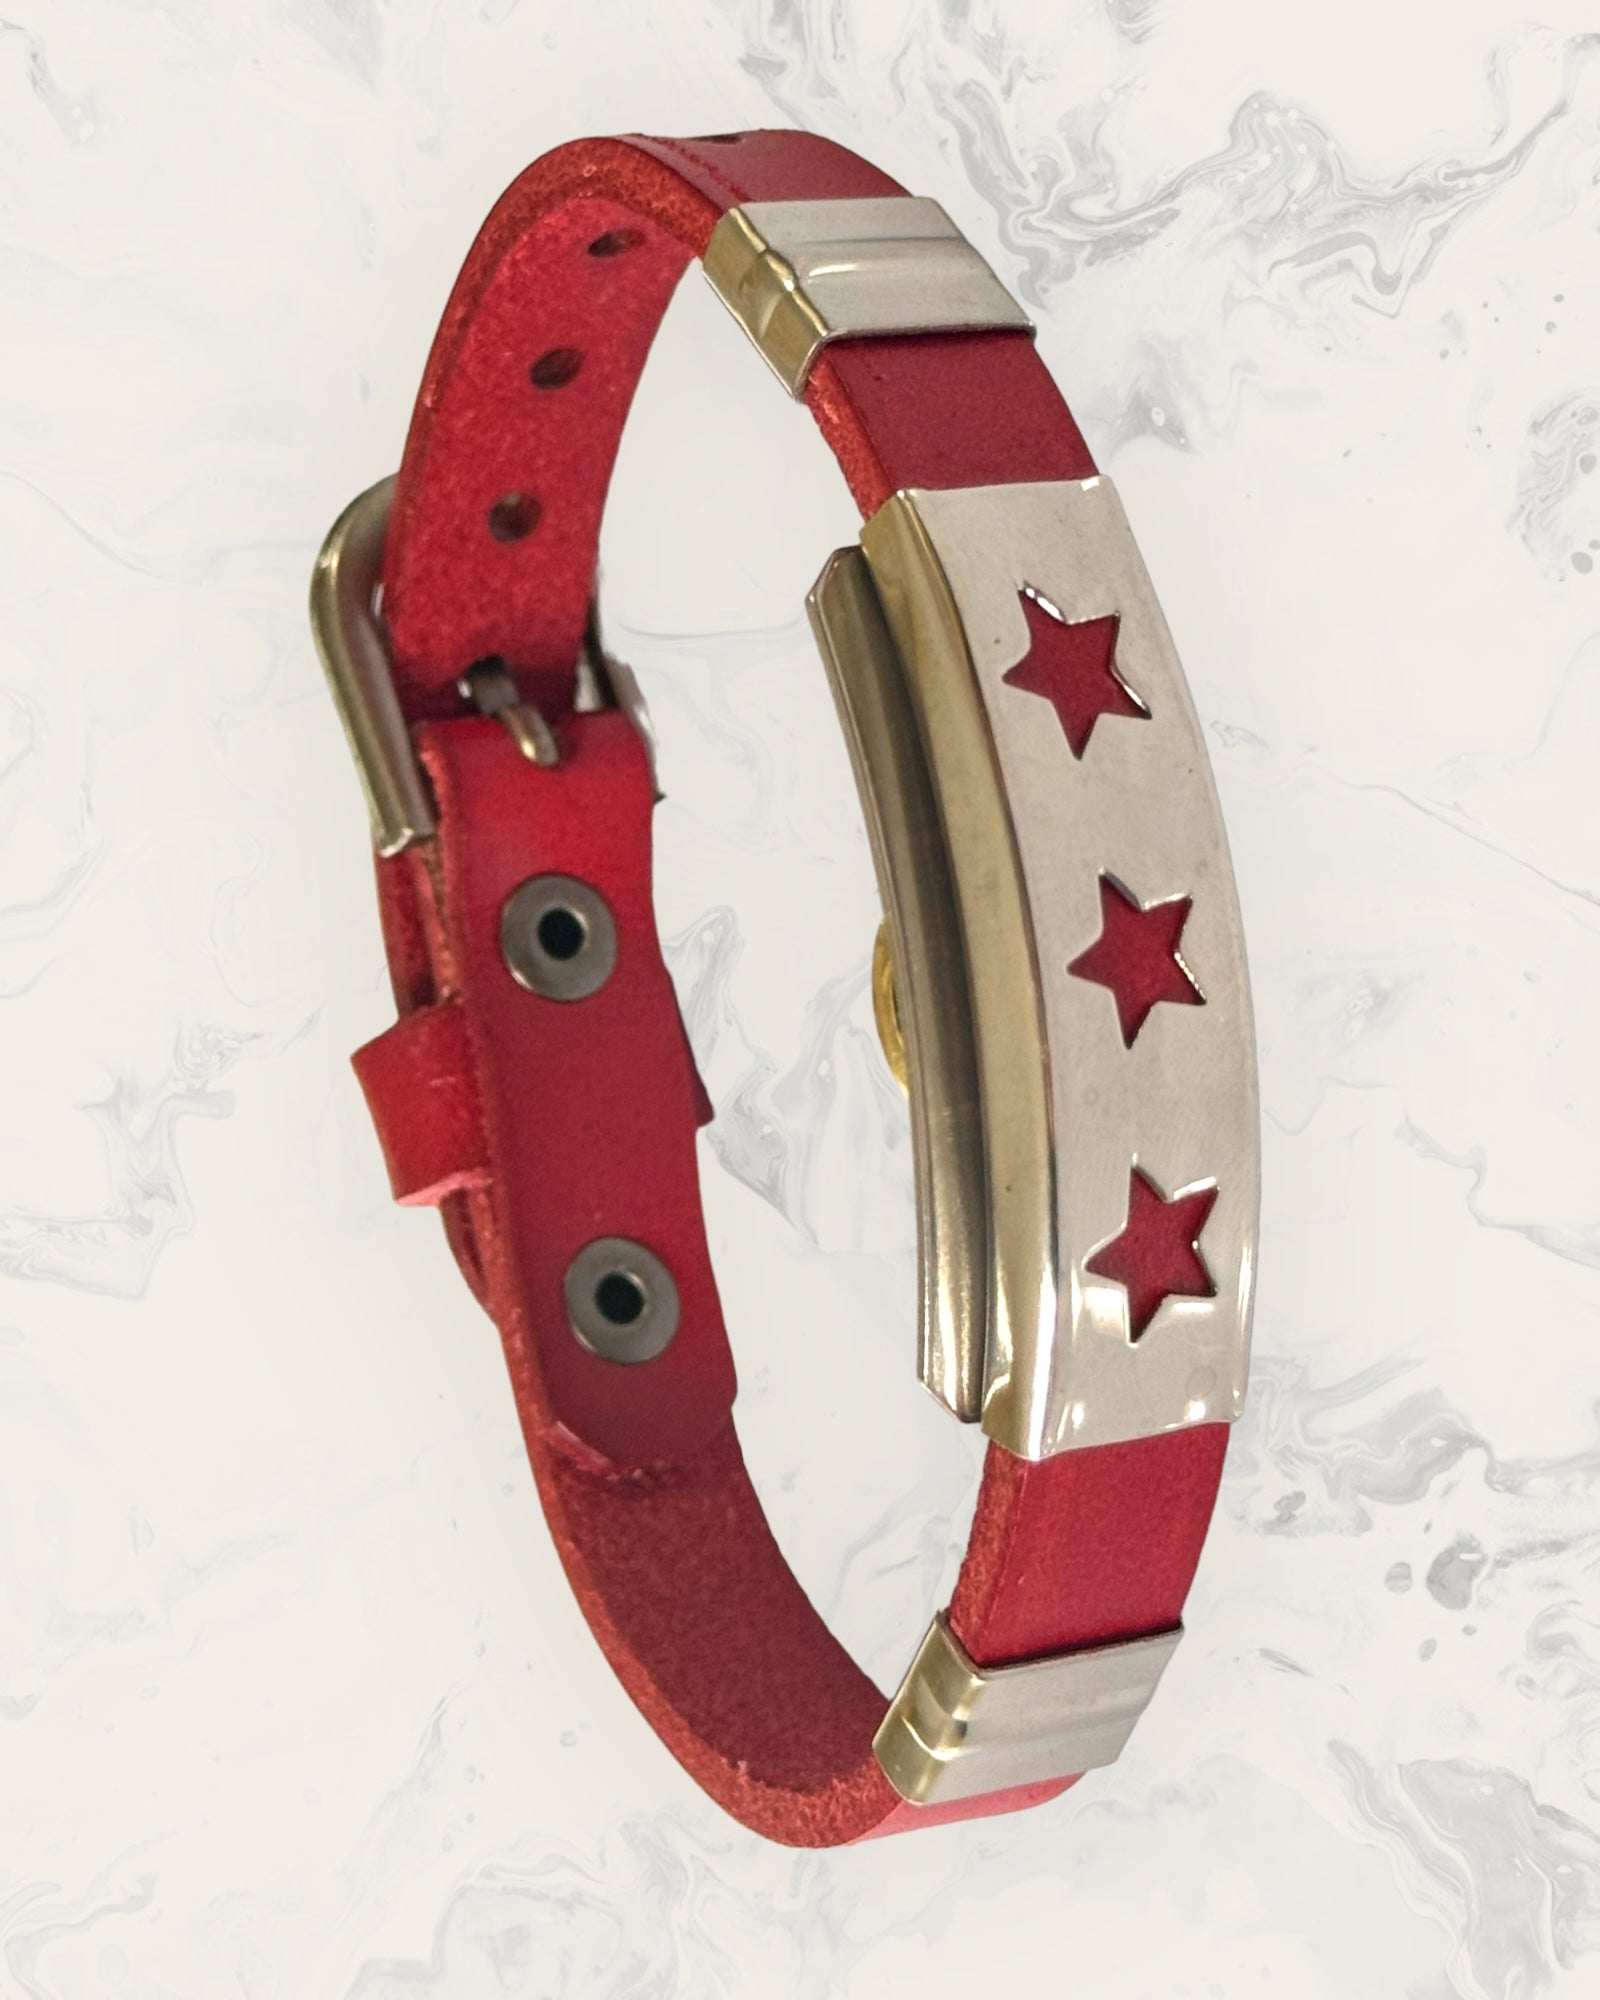 Natural Pain Relief and EMF Protection Bracelet Leather Band Color Red with a Star design on a silver metal slider